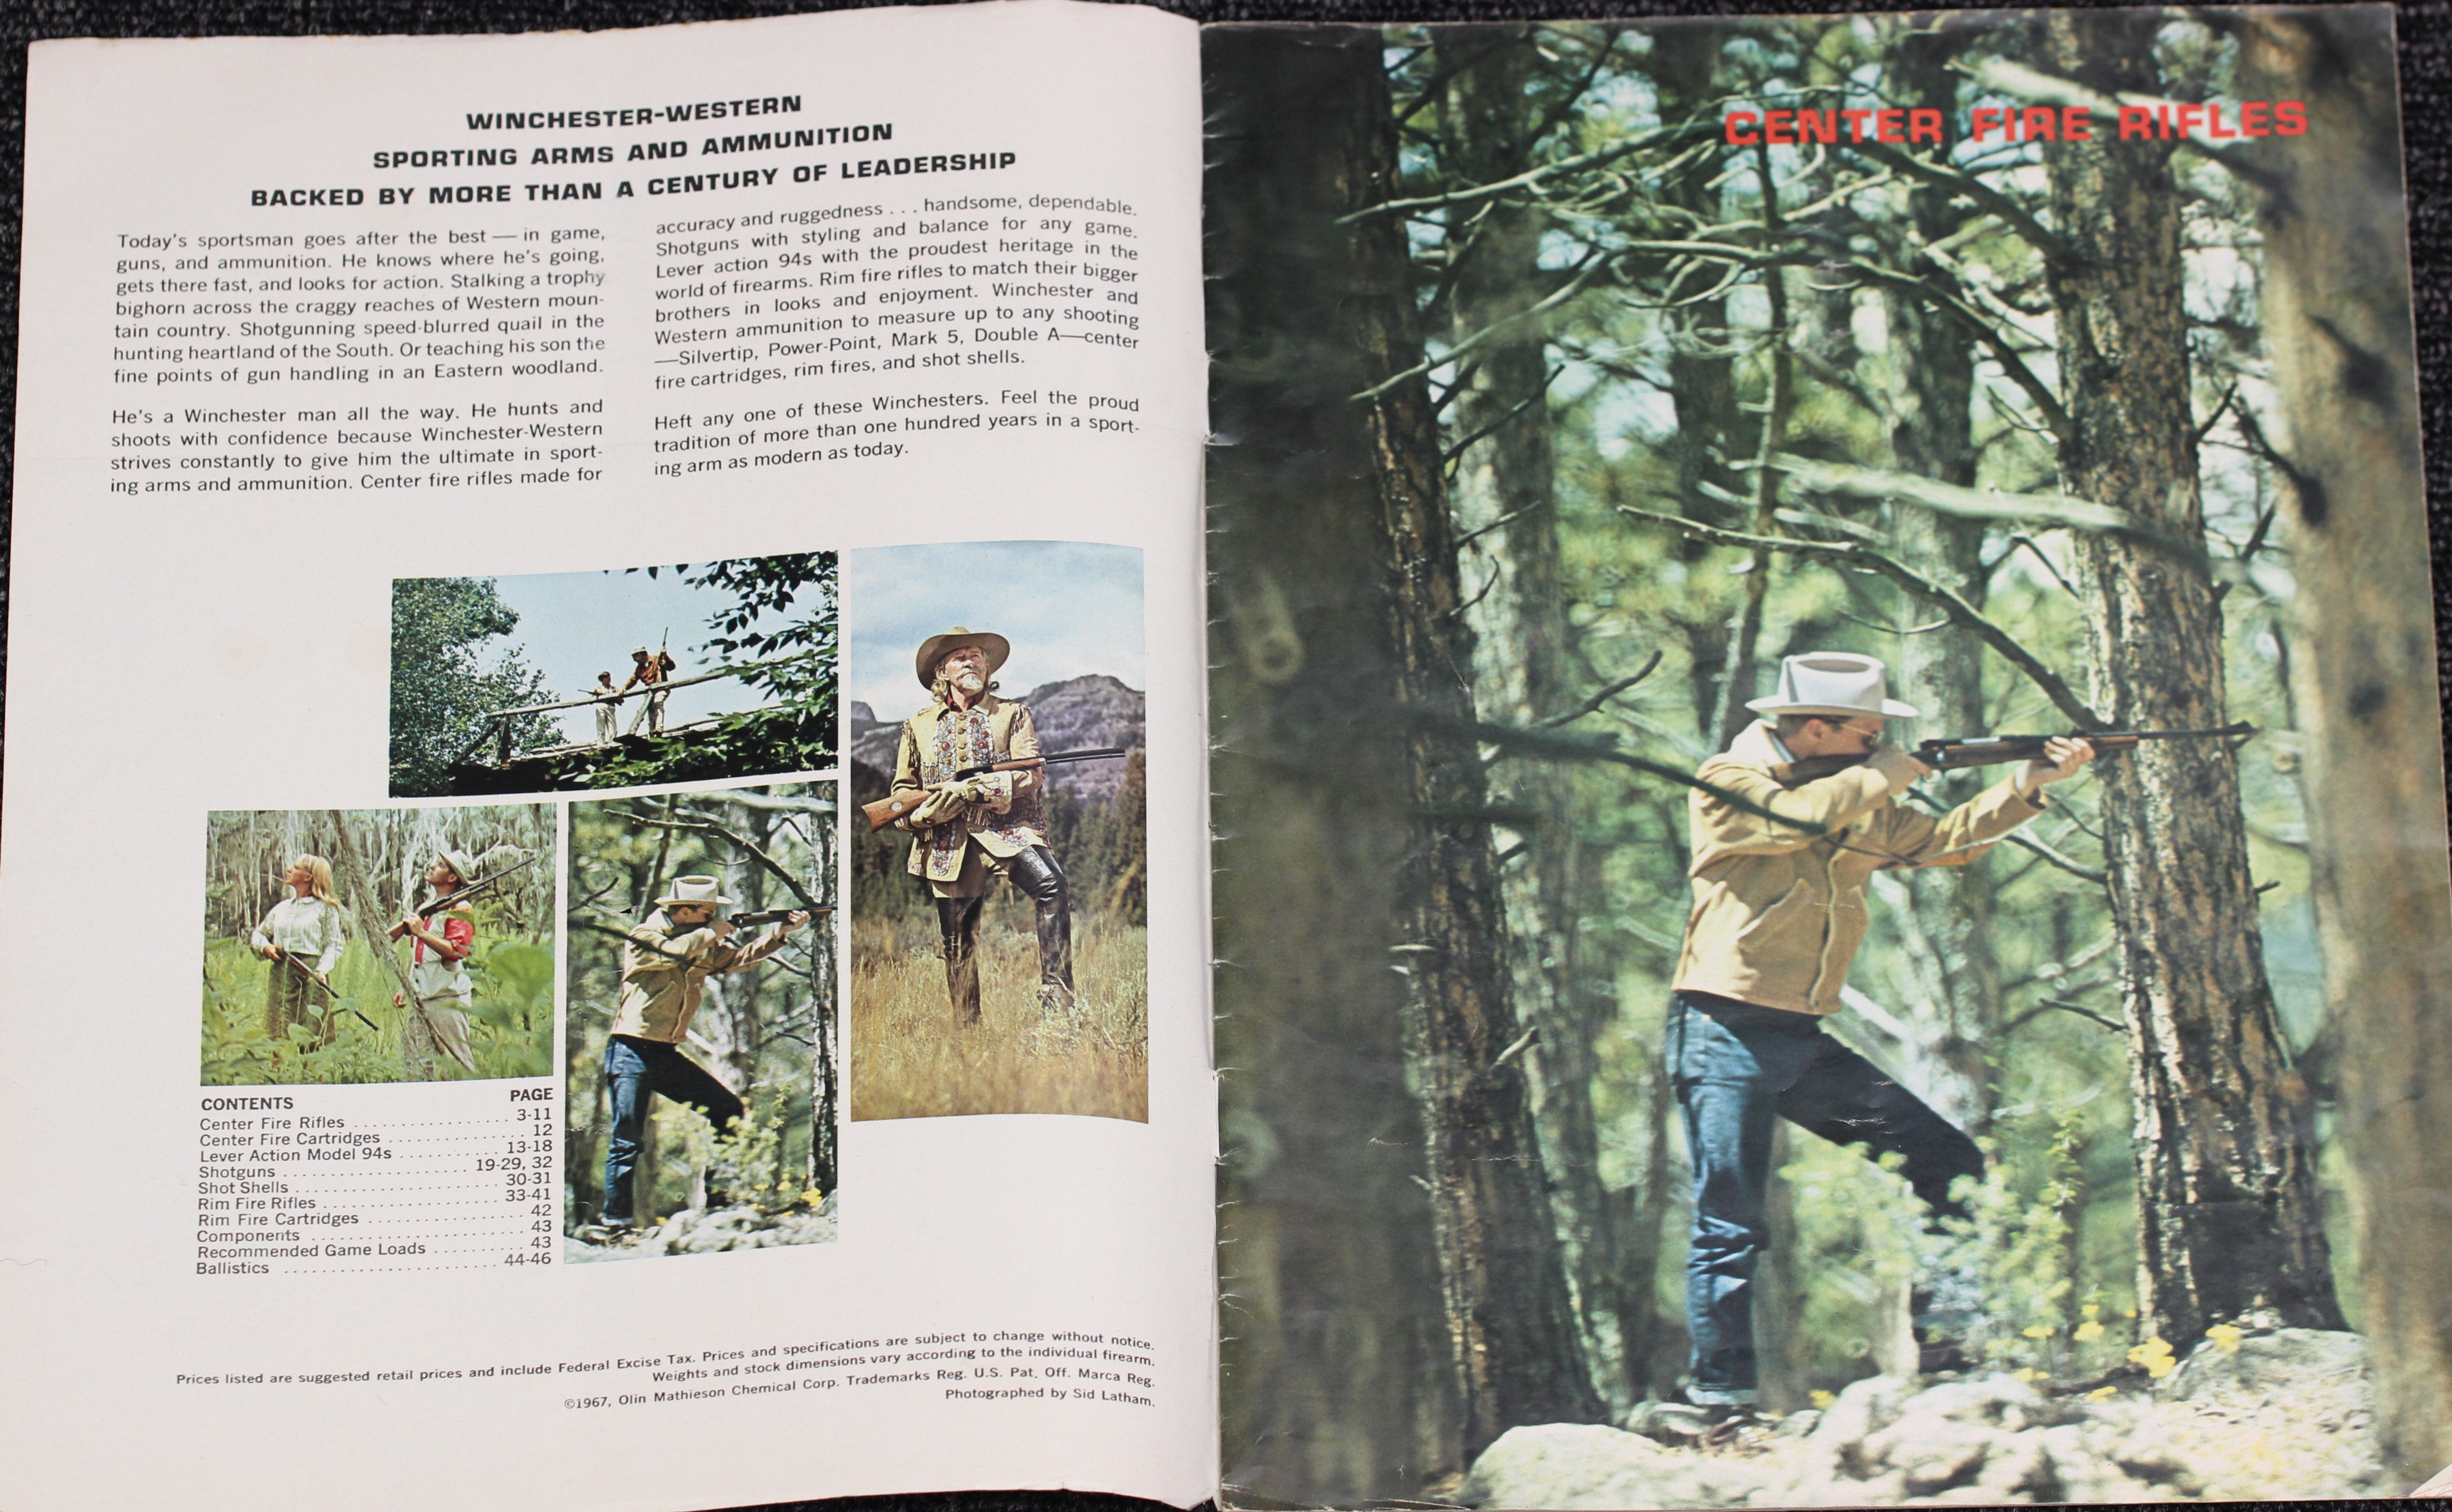 1968 Winchester-Western Sporting Arms and Ammunition Catalog